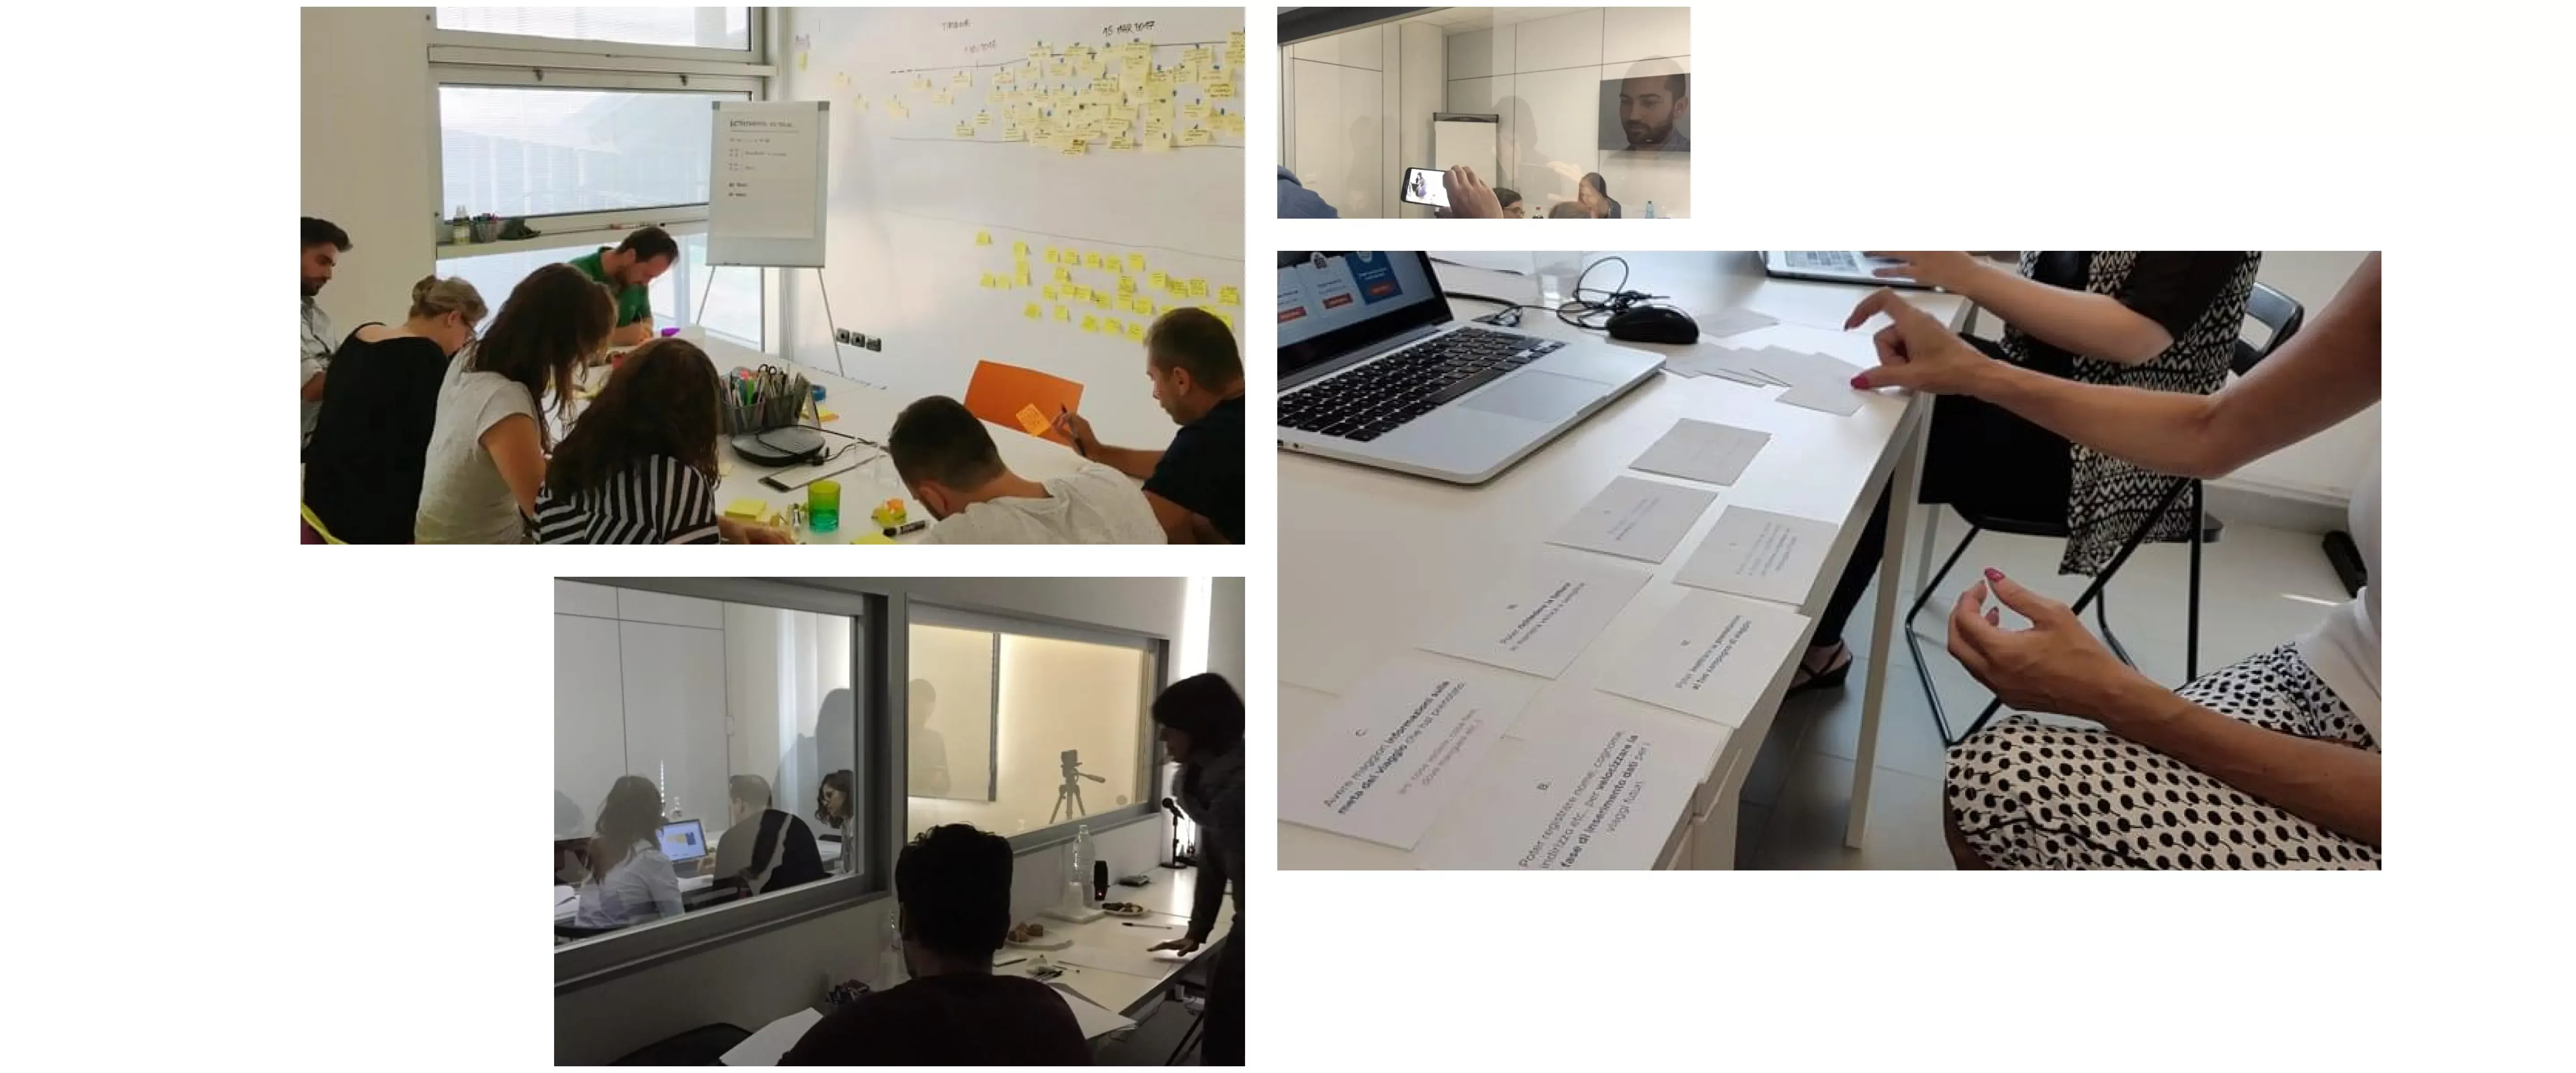 Photos of the teamwork during retrospective and user tests sessions